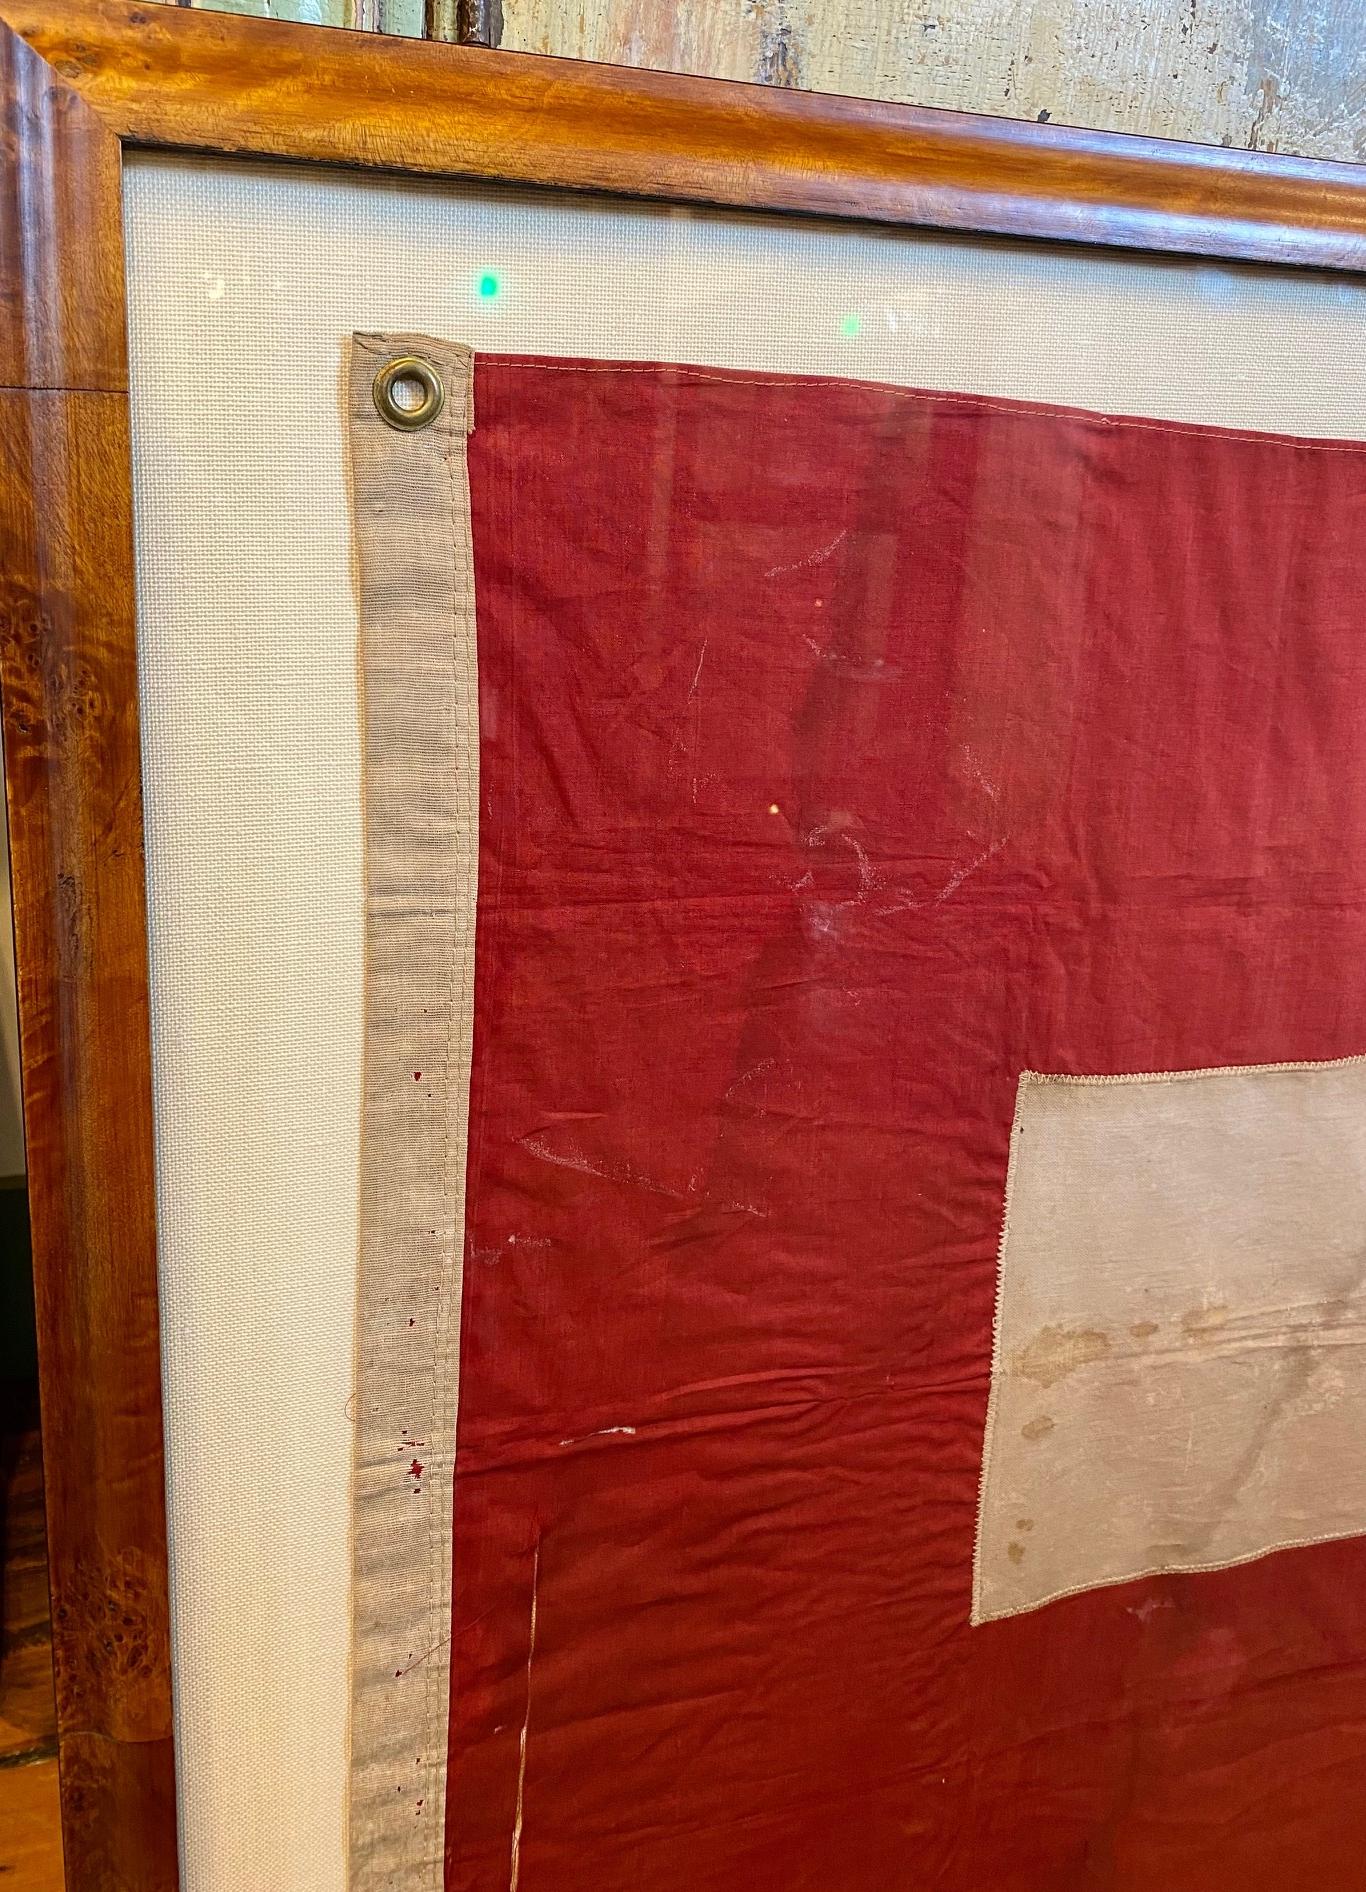 Antique Historic American Blue Star Flag, circa 1917, a World War I flag honoring a family member in service. The flag is hand crafted of linen. It is structurally sound and in very good condition, but does show the weathering from use flying